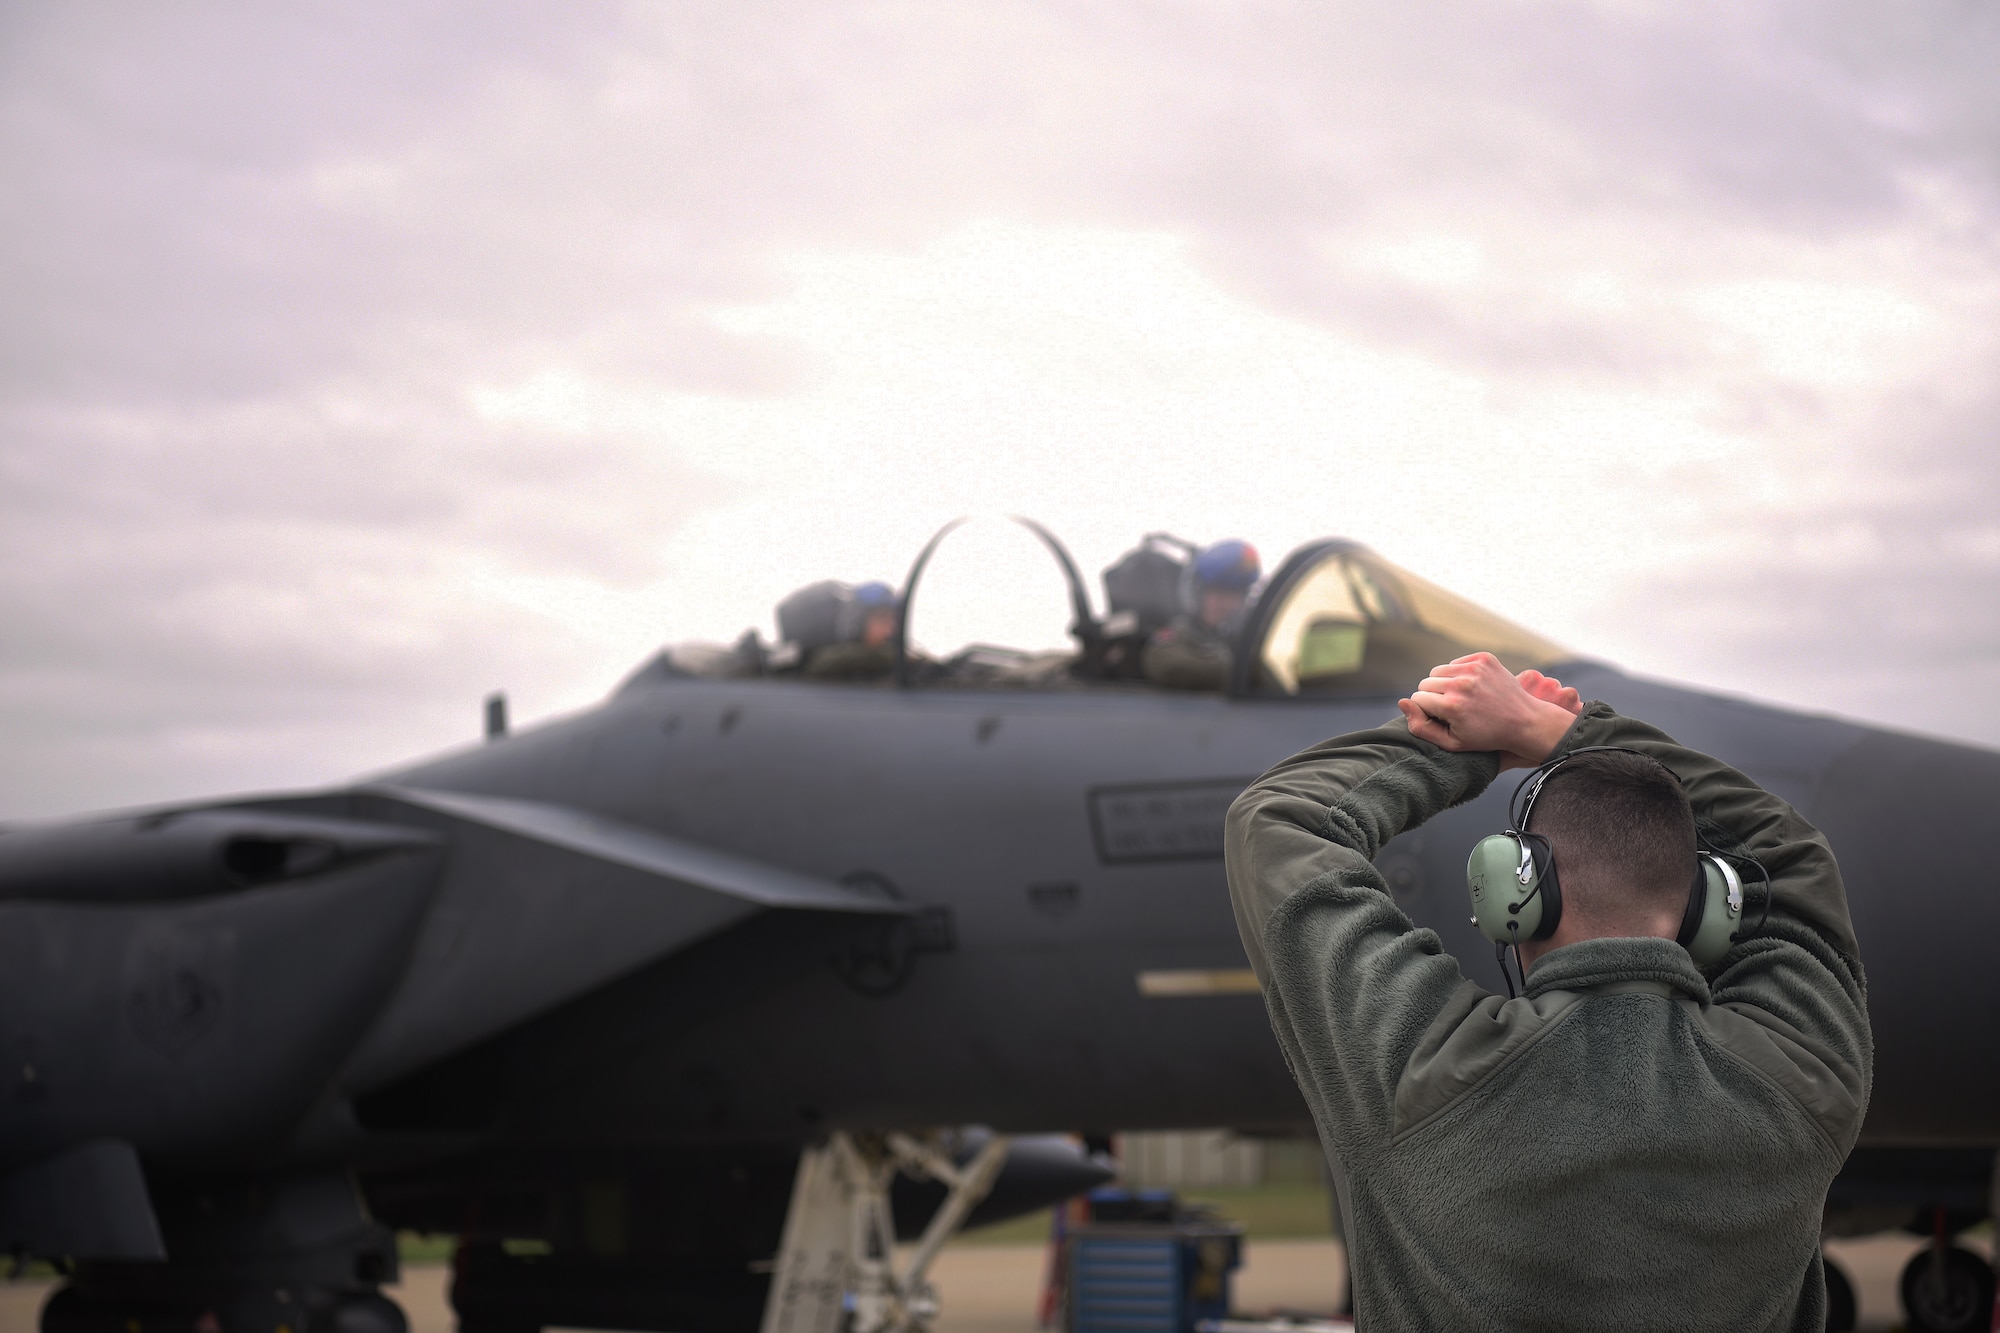 A 492nd Aircraft Maintenance Unit crew chief marshals an F-15E Strike Eagle at Royal Air Force Lakenheath, England, Jan. 7, 2019. Aircraft marshalling is a method of visual communication between aircrew and crew chiefs as an alternative to radio communication. (U.S. Air Force photo by Airman 1st Class Shanice Williams-Jones)